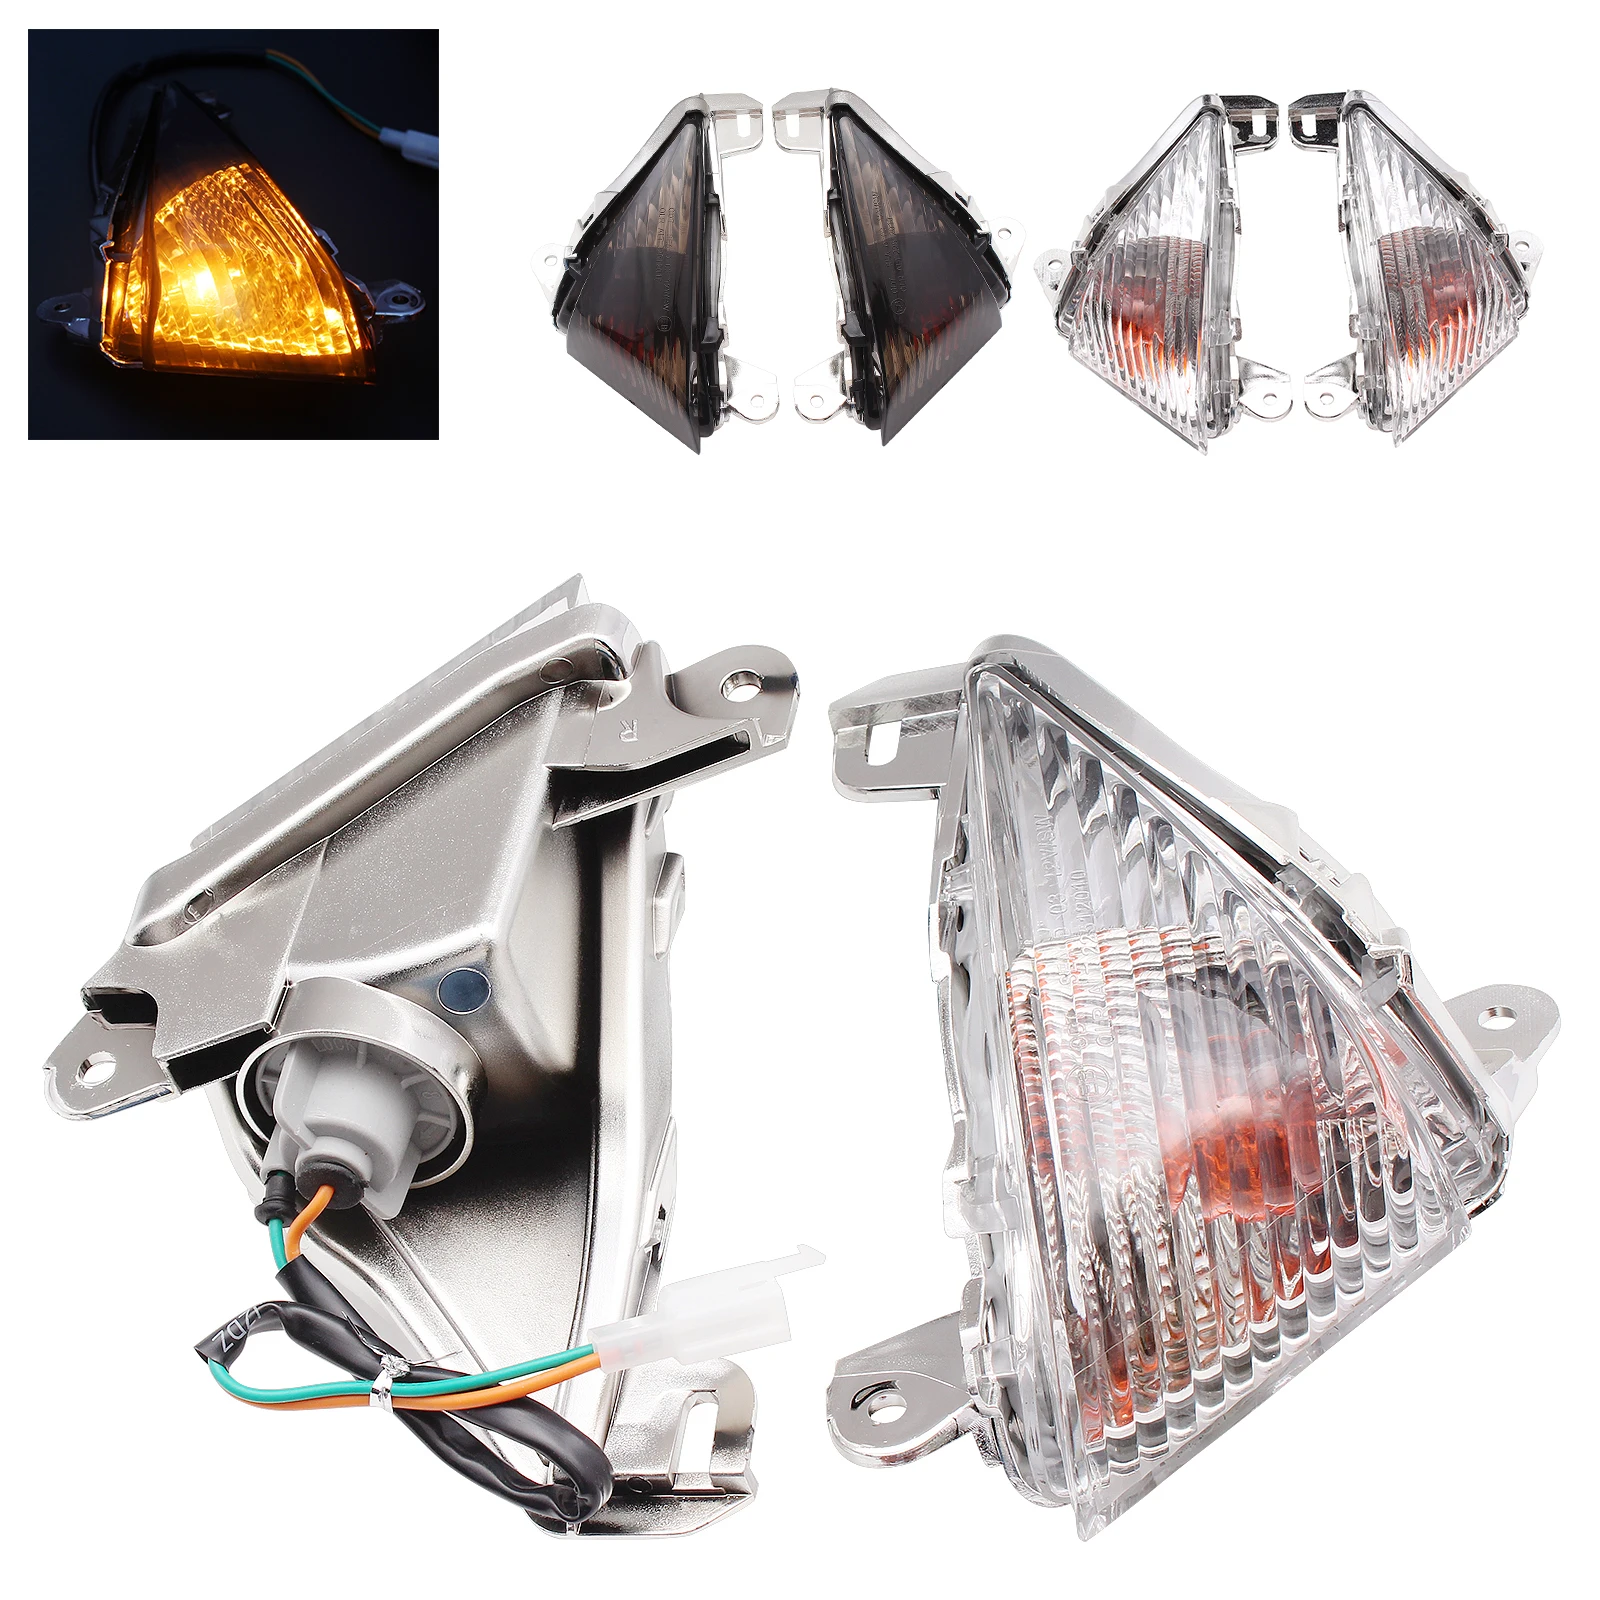 Front Turn Signal Indicator For KAWASAKI GTR1400 CONCOURS 14 08-20 ZZ-R 1400 ZX-14R 06-20 Motorcycle Light Bulb Accessories